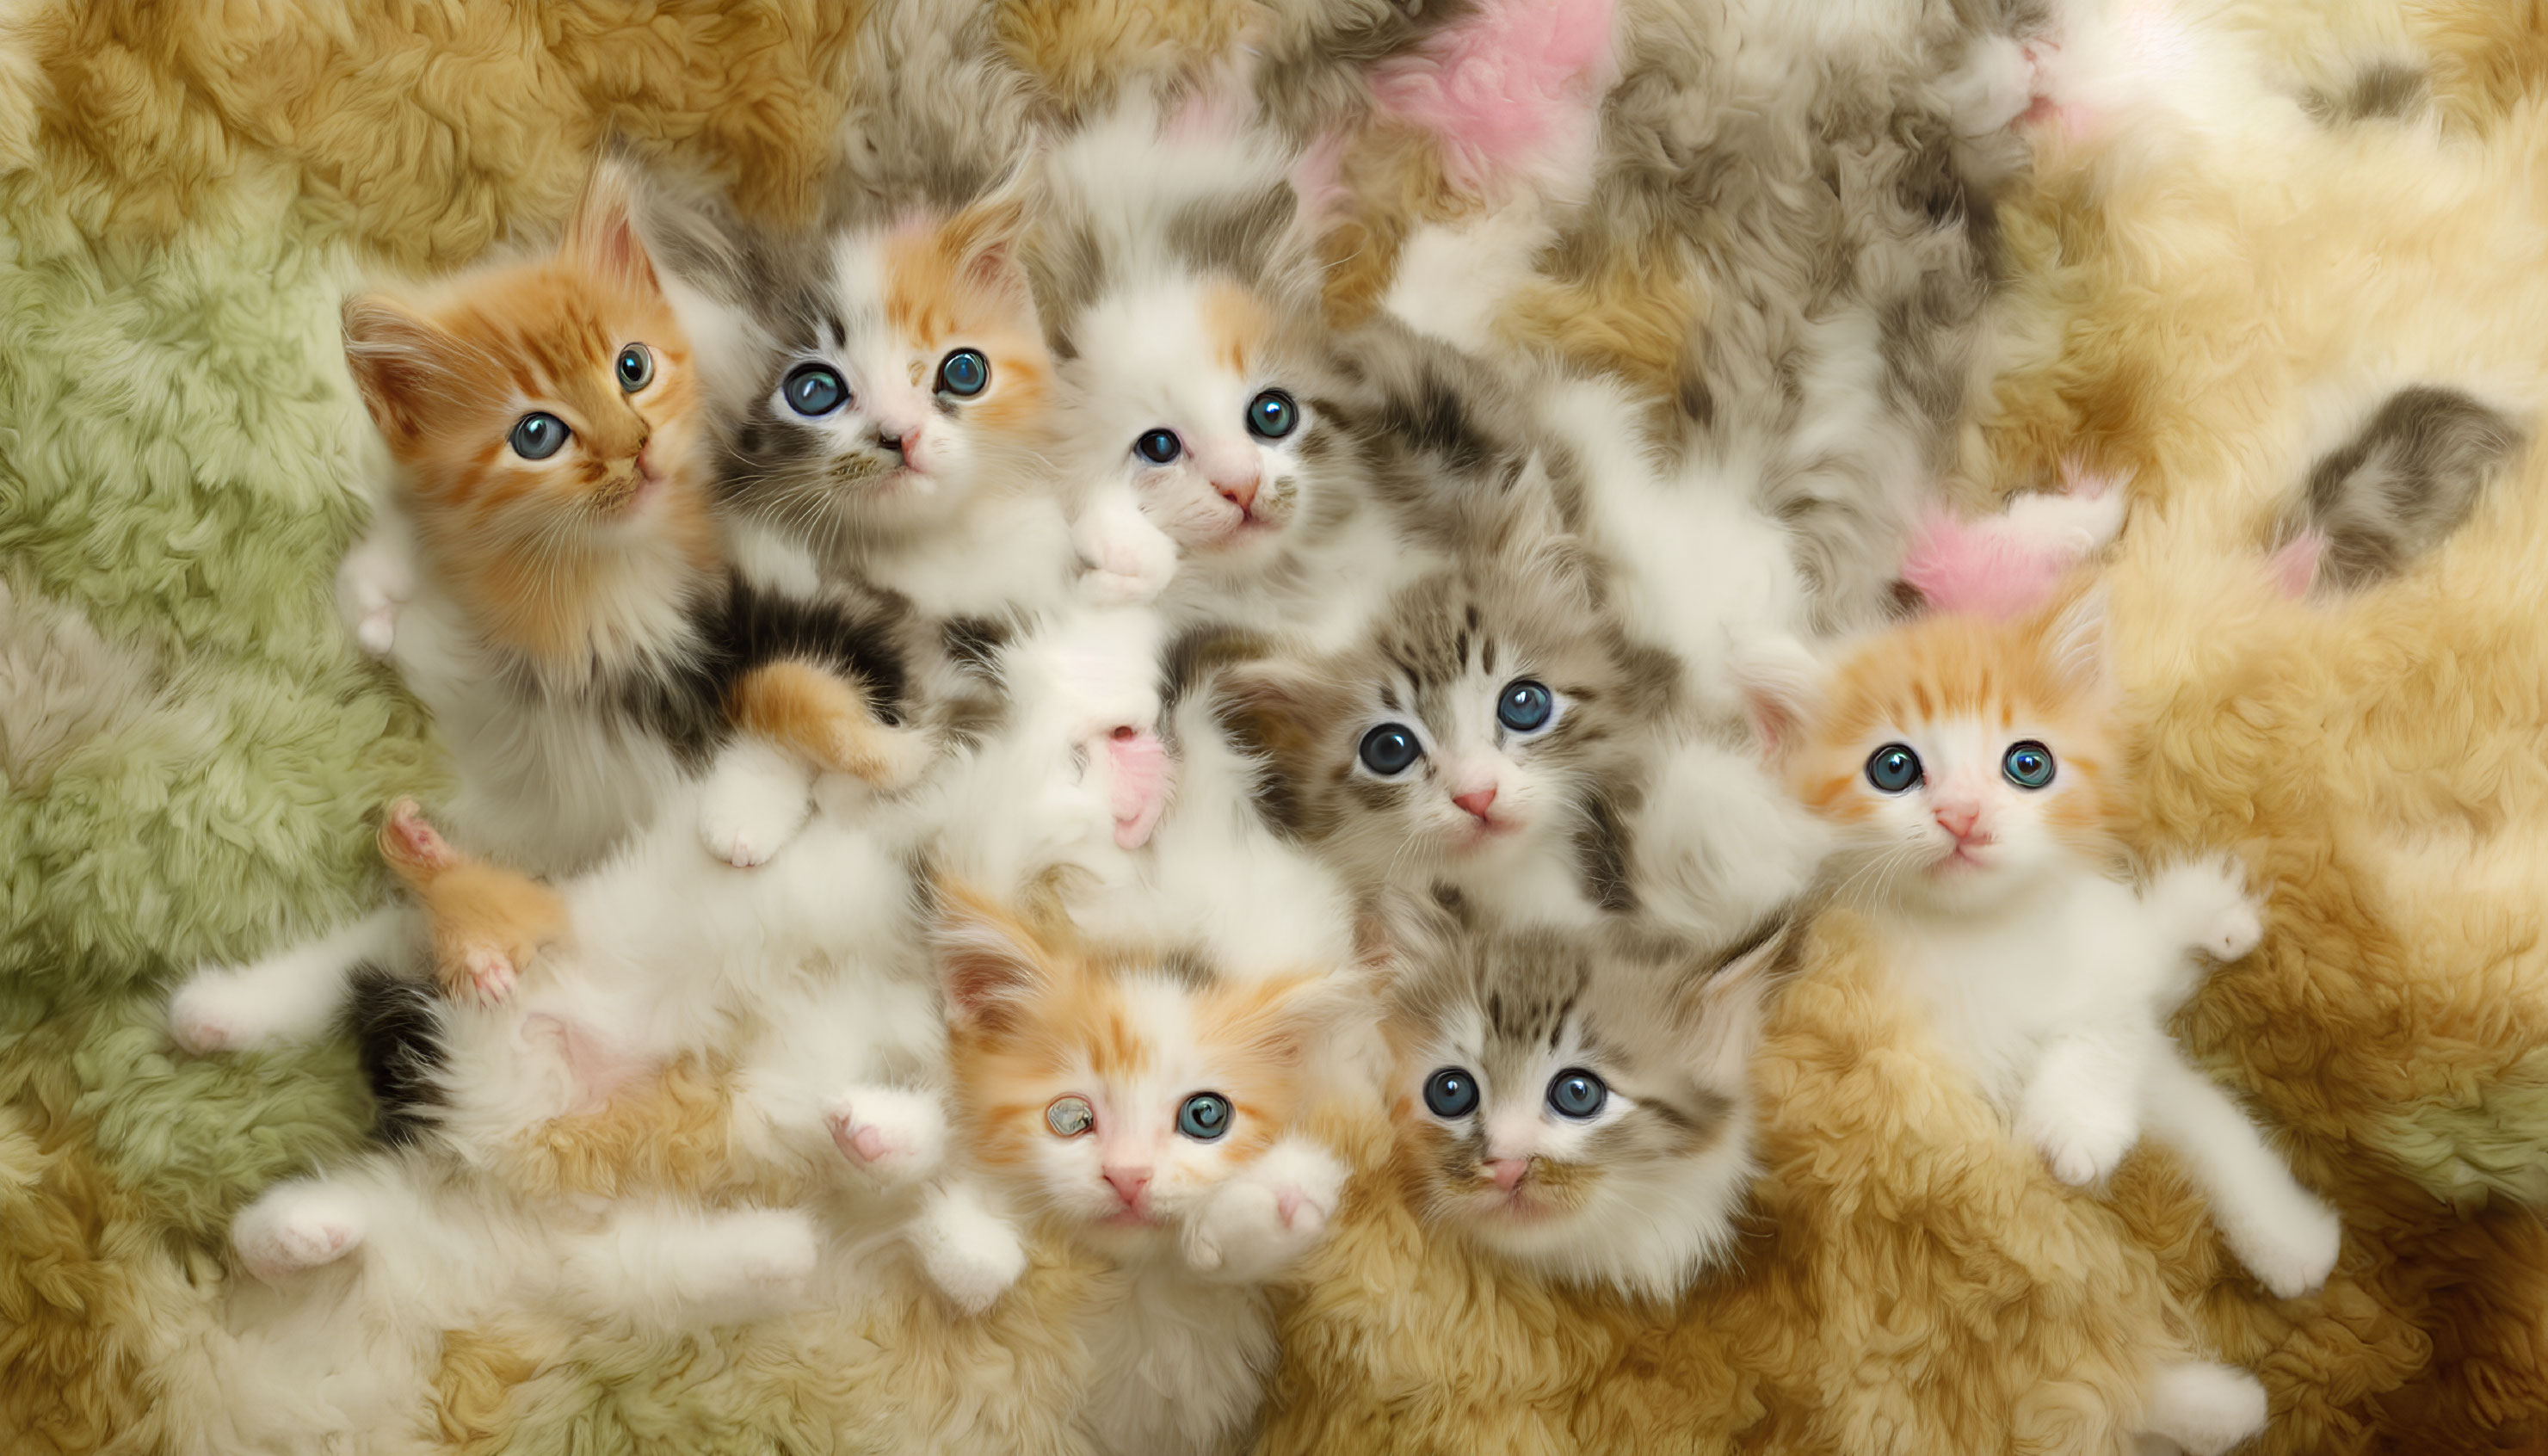 Group of Fluffy Kittens with Bright Blue Eyes Cuddled Together